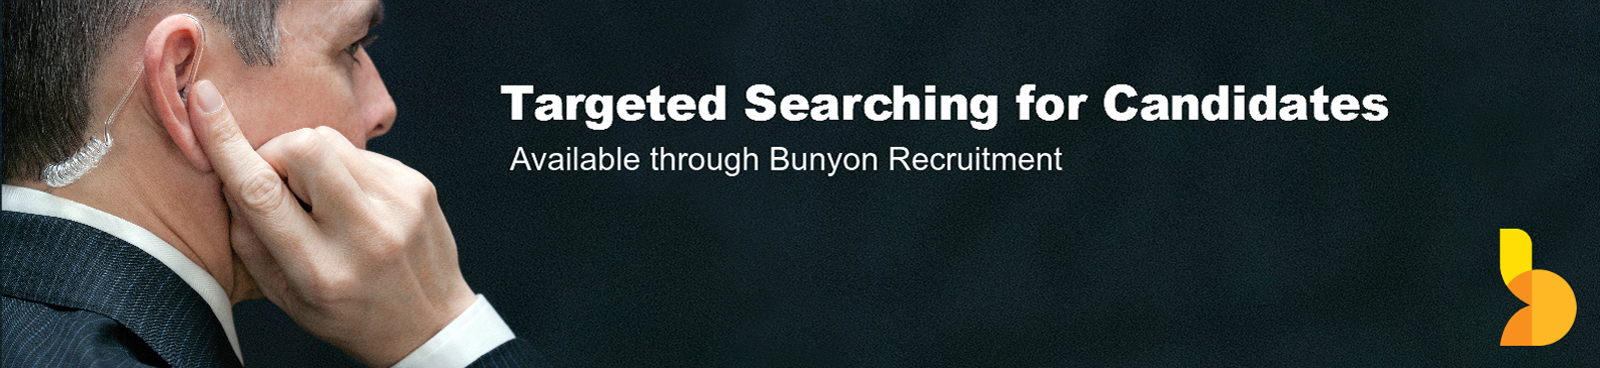 targeted-searching